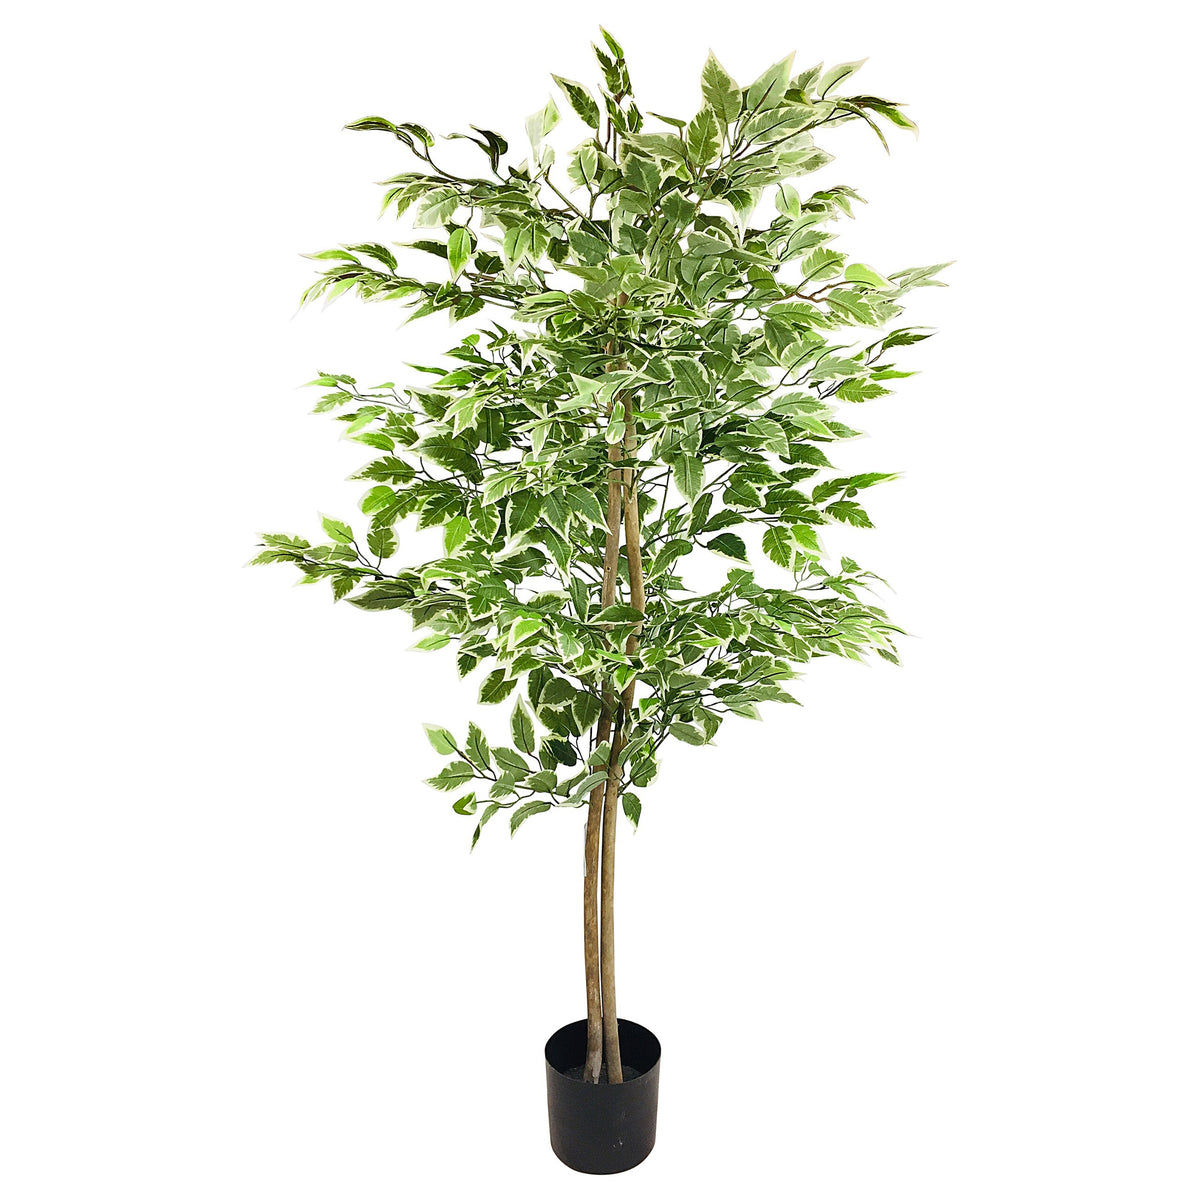 Artificial Ficus Tree - Variegated Leaves, 150cm (4.9ft)